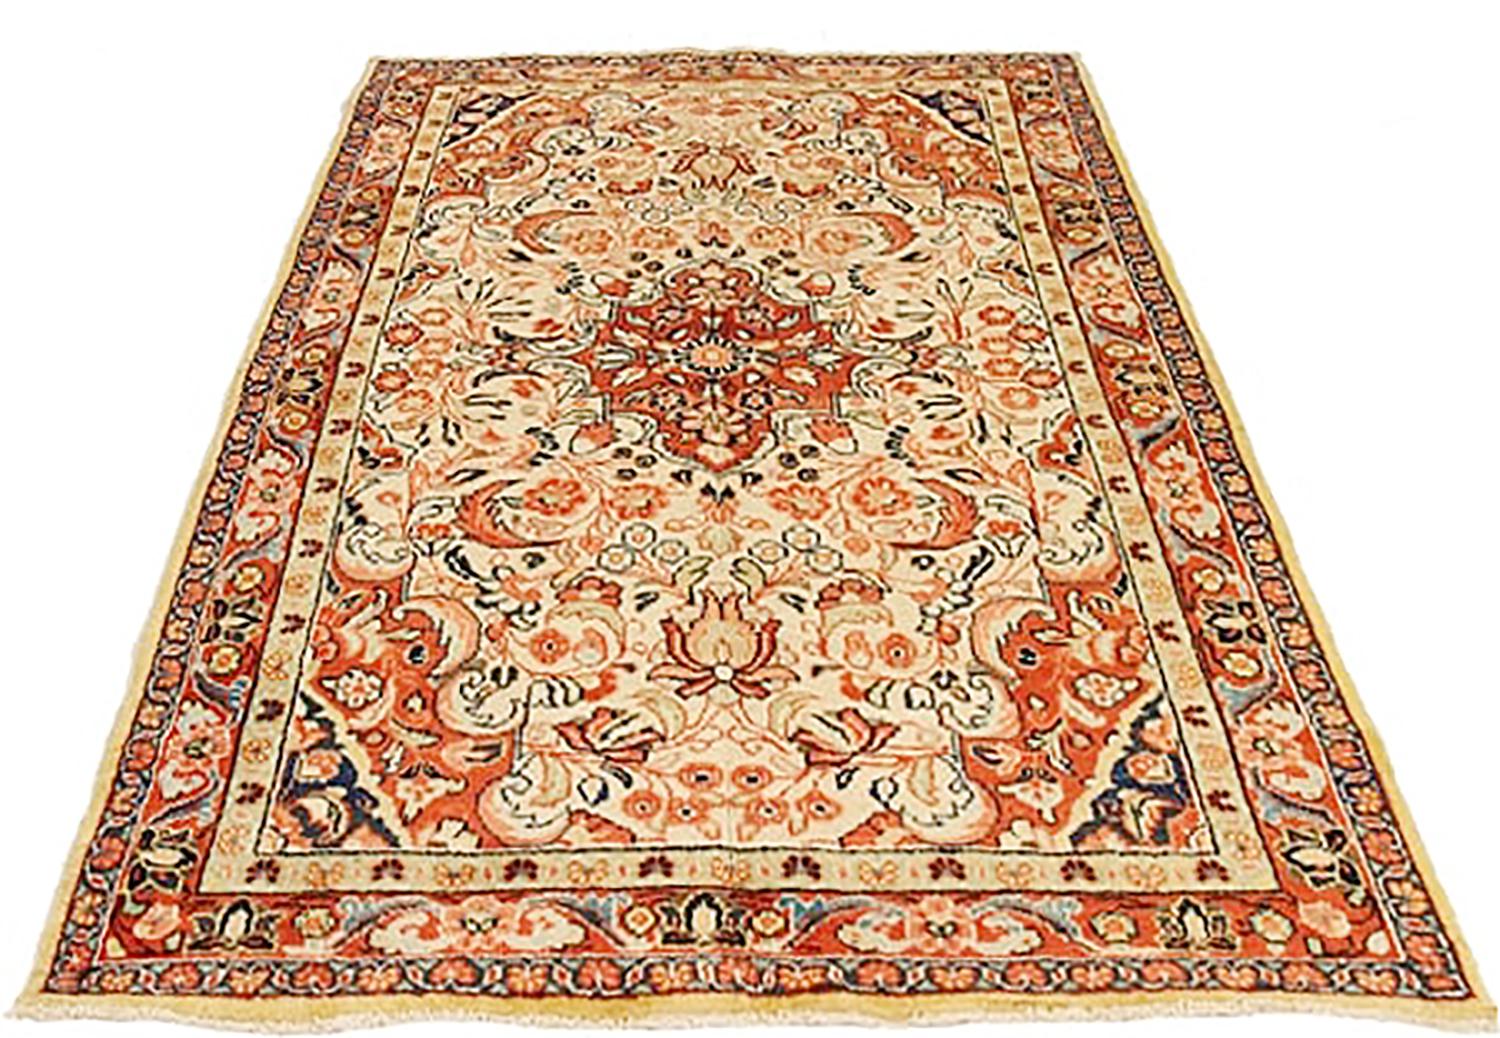 Antique Persian rug handwoven from the finest sheep’s wool and colored with all-natural vegetable dyes that are safe for humans and pets. It’s a traditional Mahal design featuring floral details in beige and rust over an ivory field. It’s a lovely